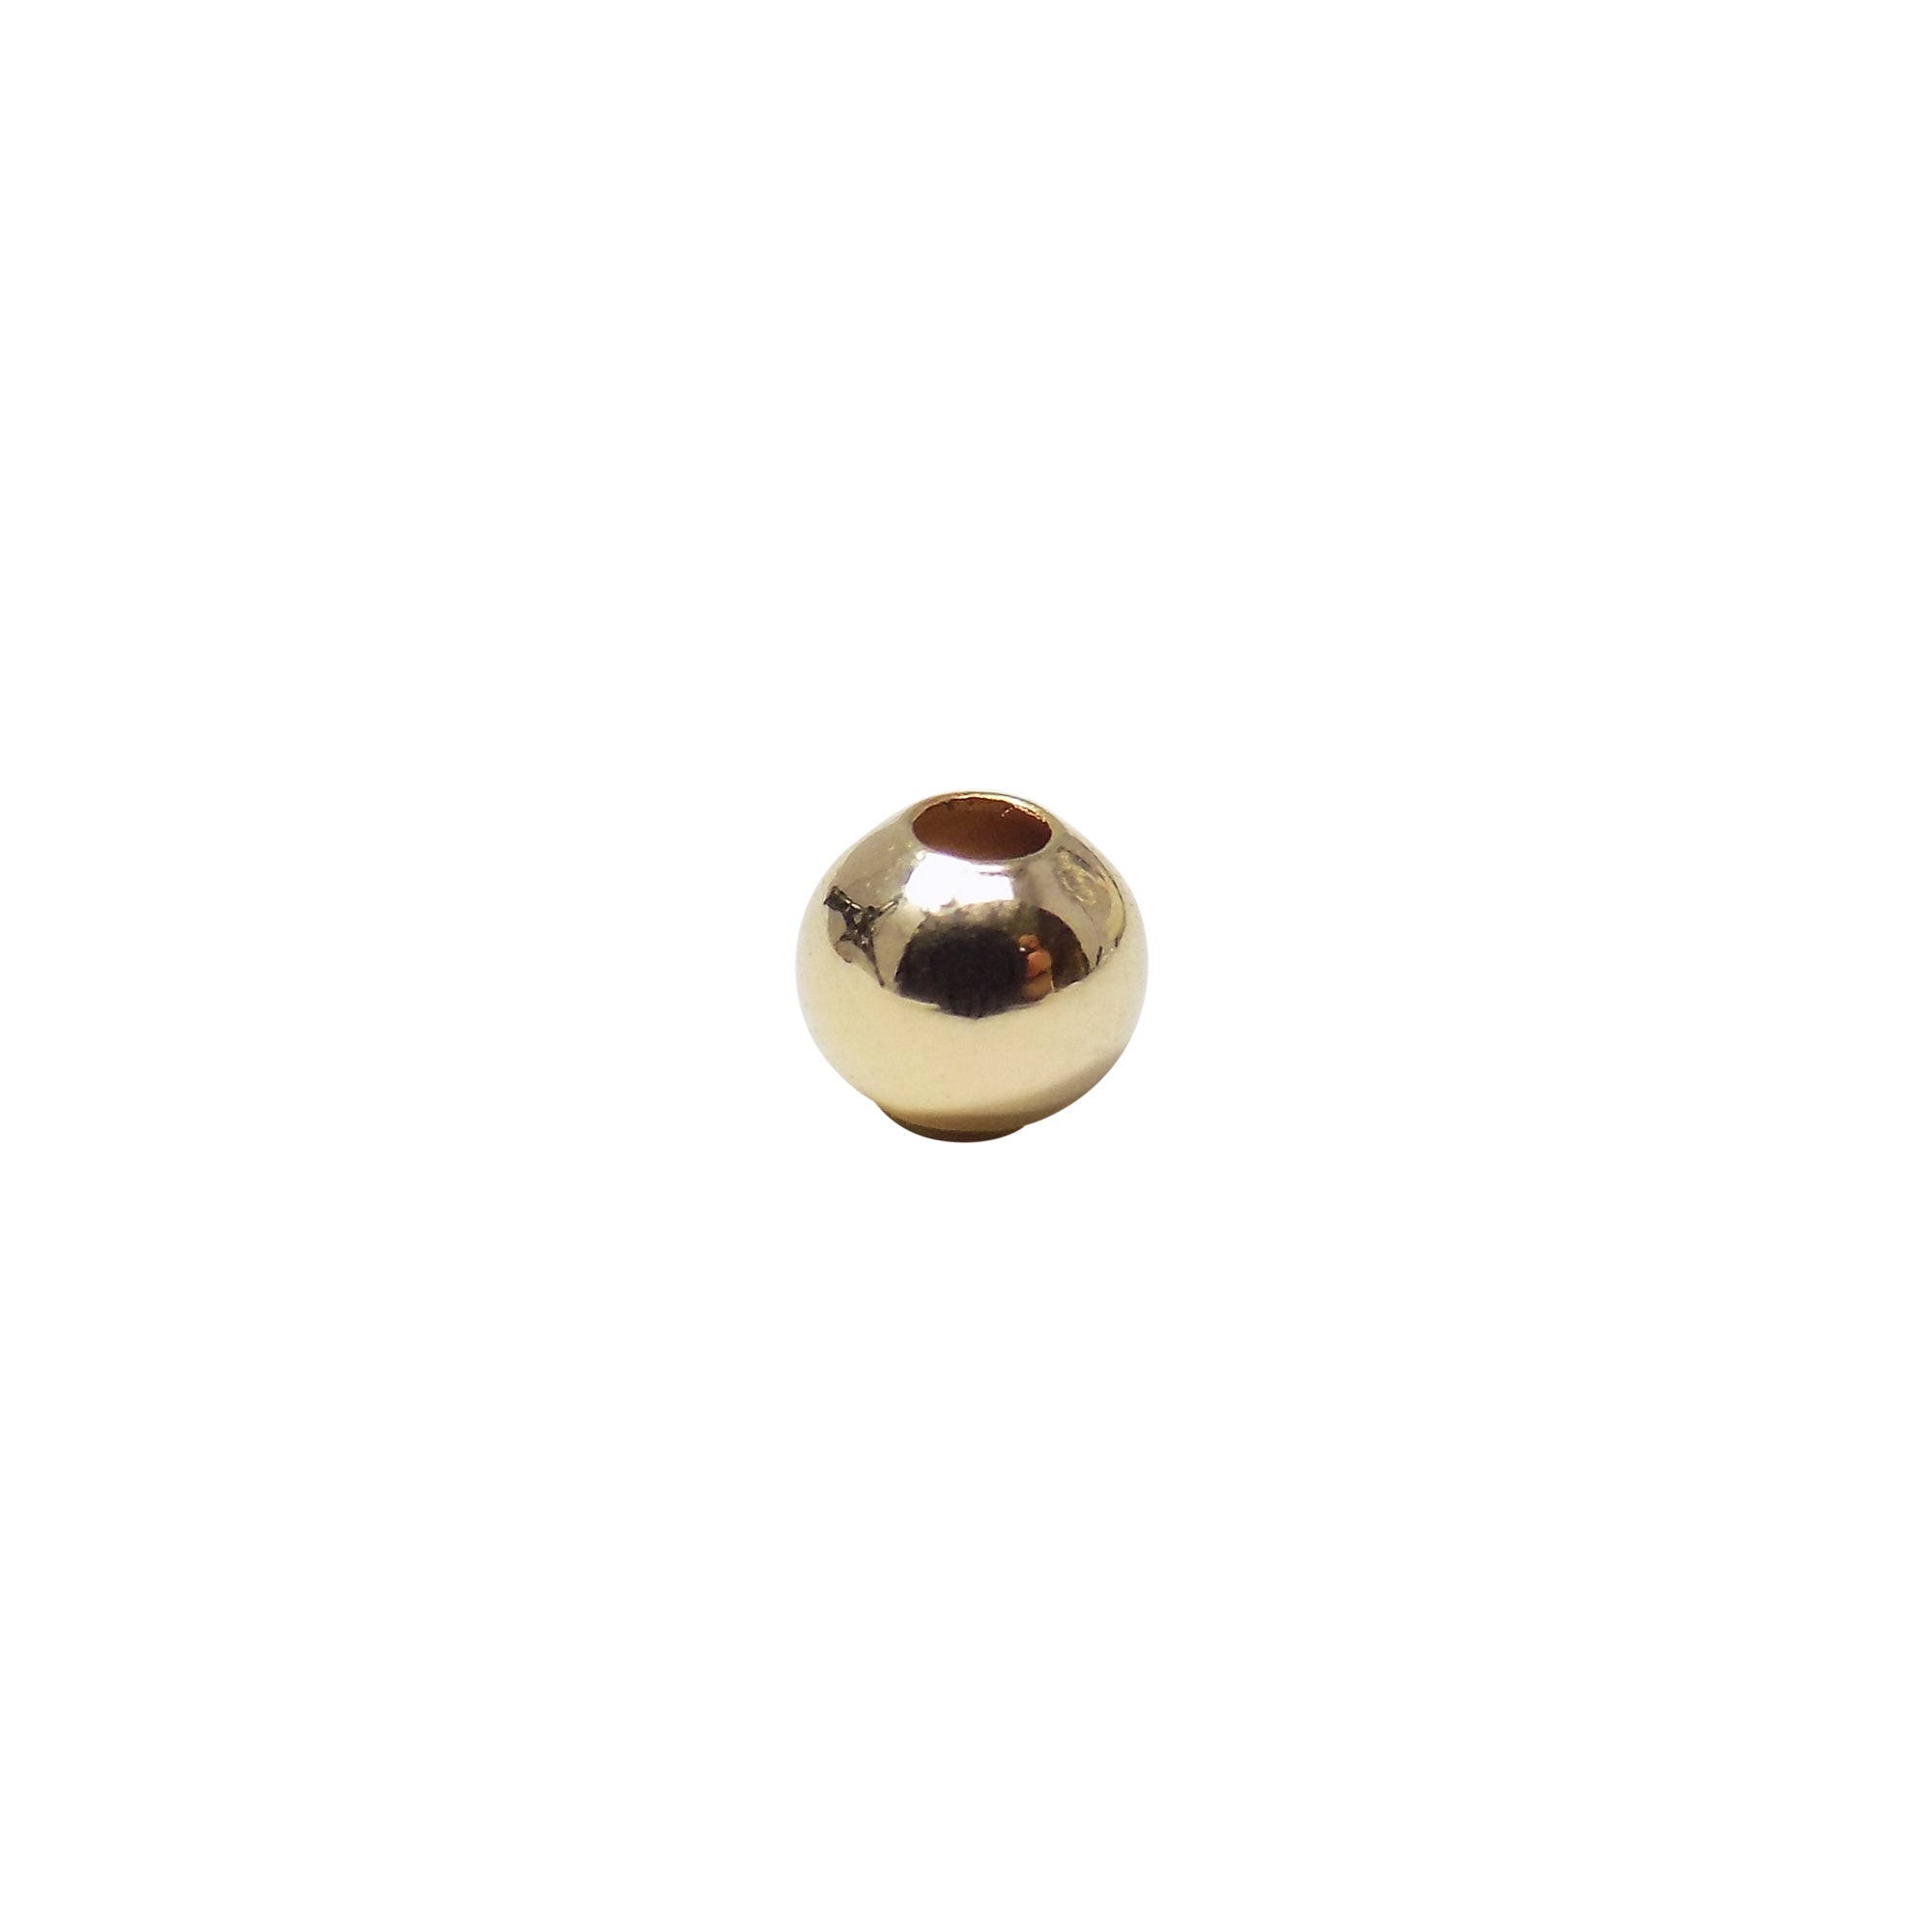 Round Beads 3mm 18K Gold Plated Hole 1.1mm High Quality